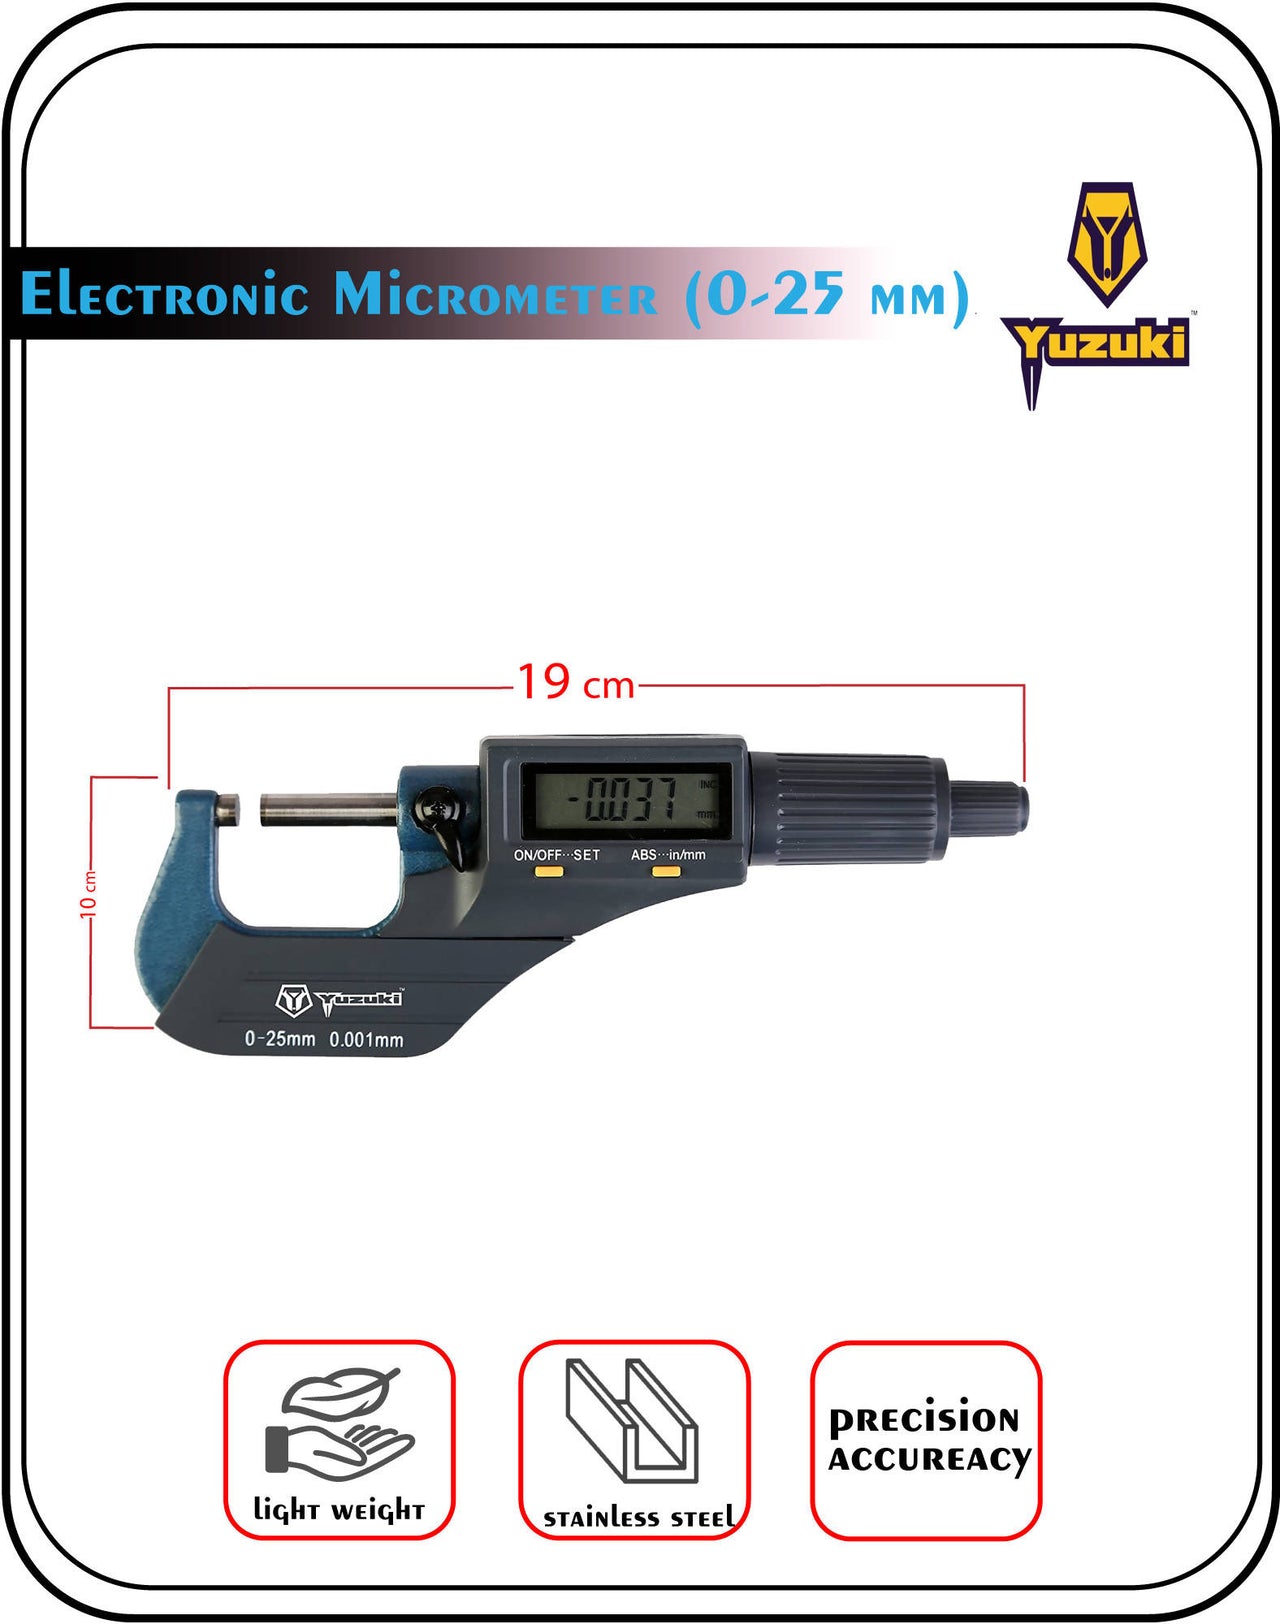 Electronic Micrometer (0-25 mm)